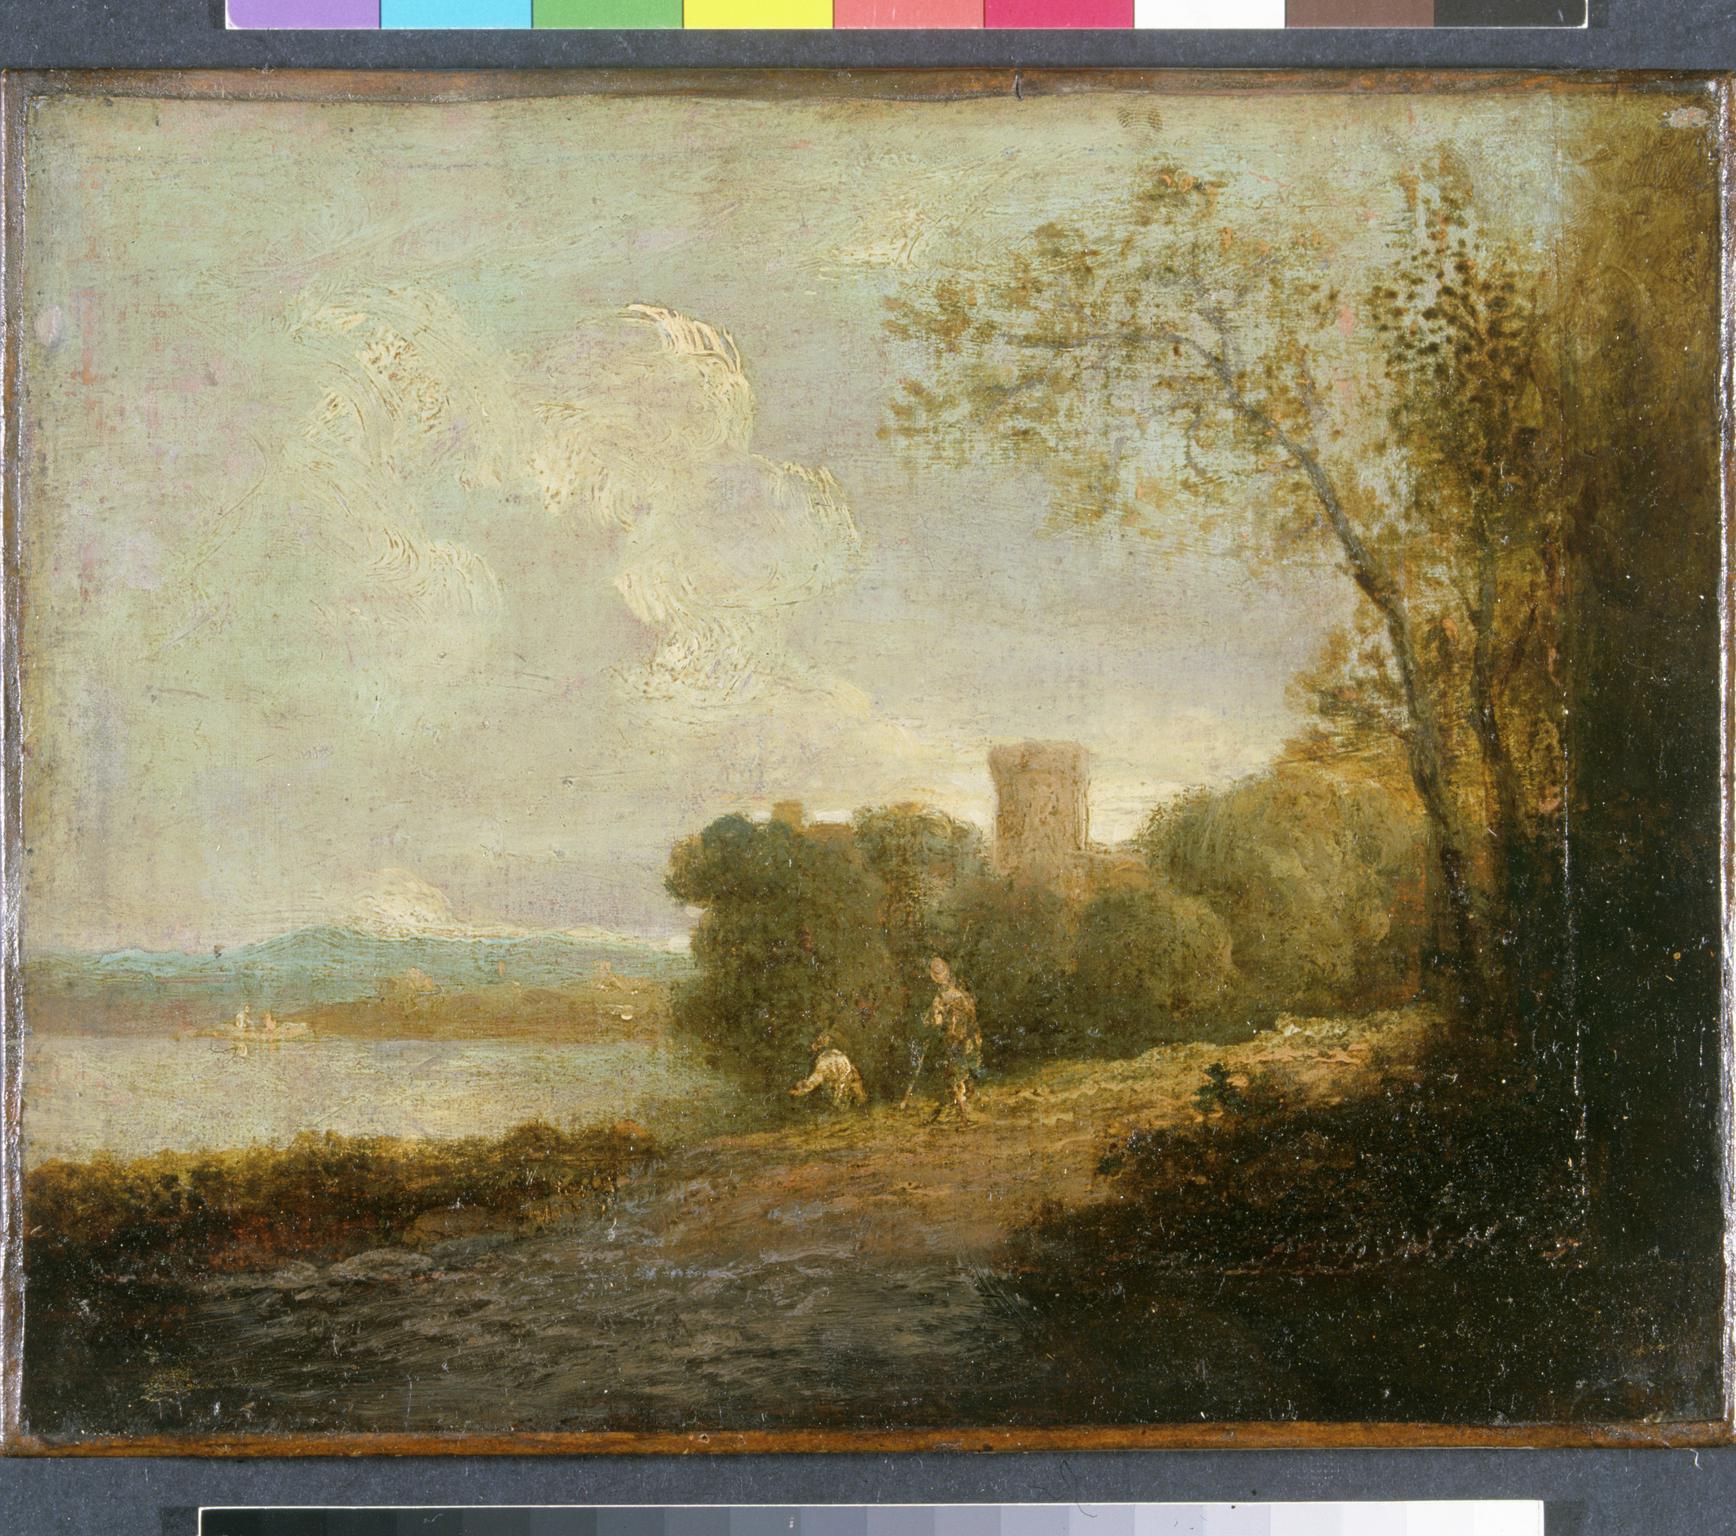 Landscape with a castle by a lake